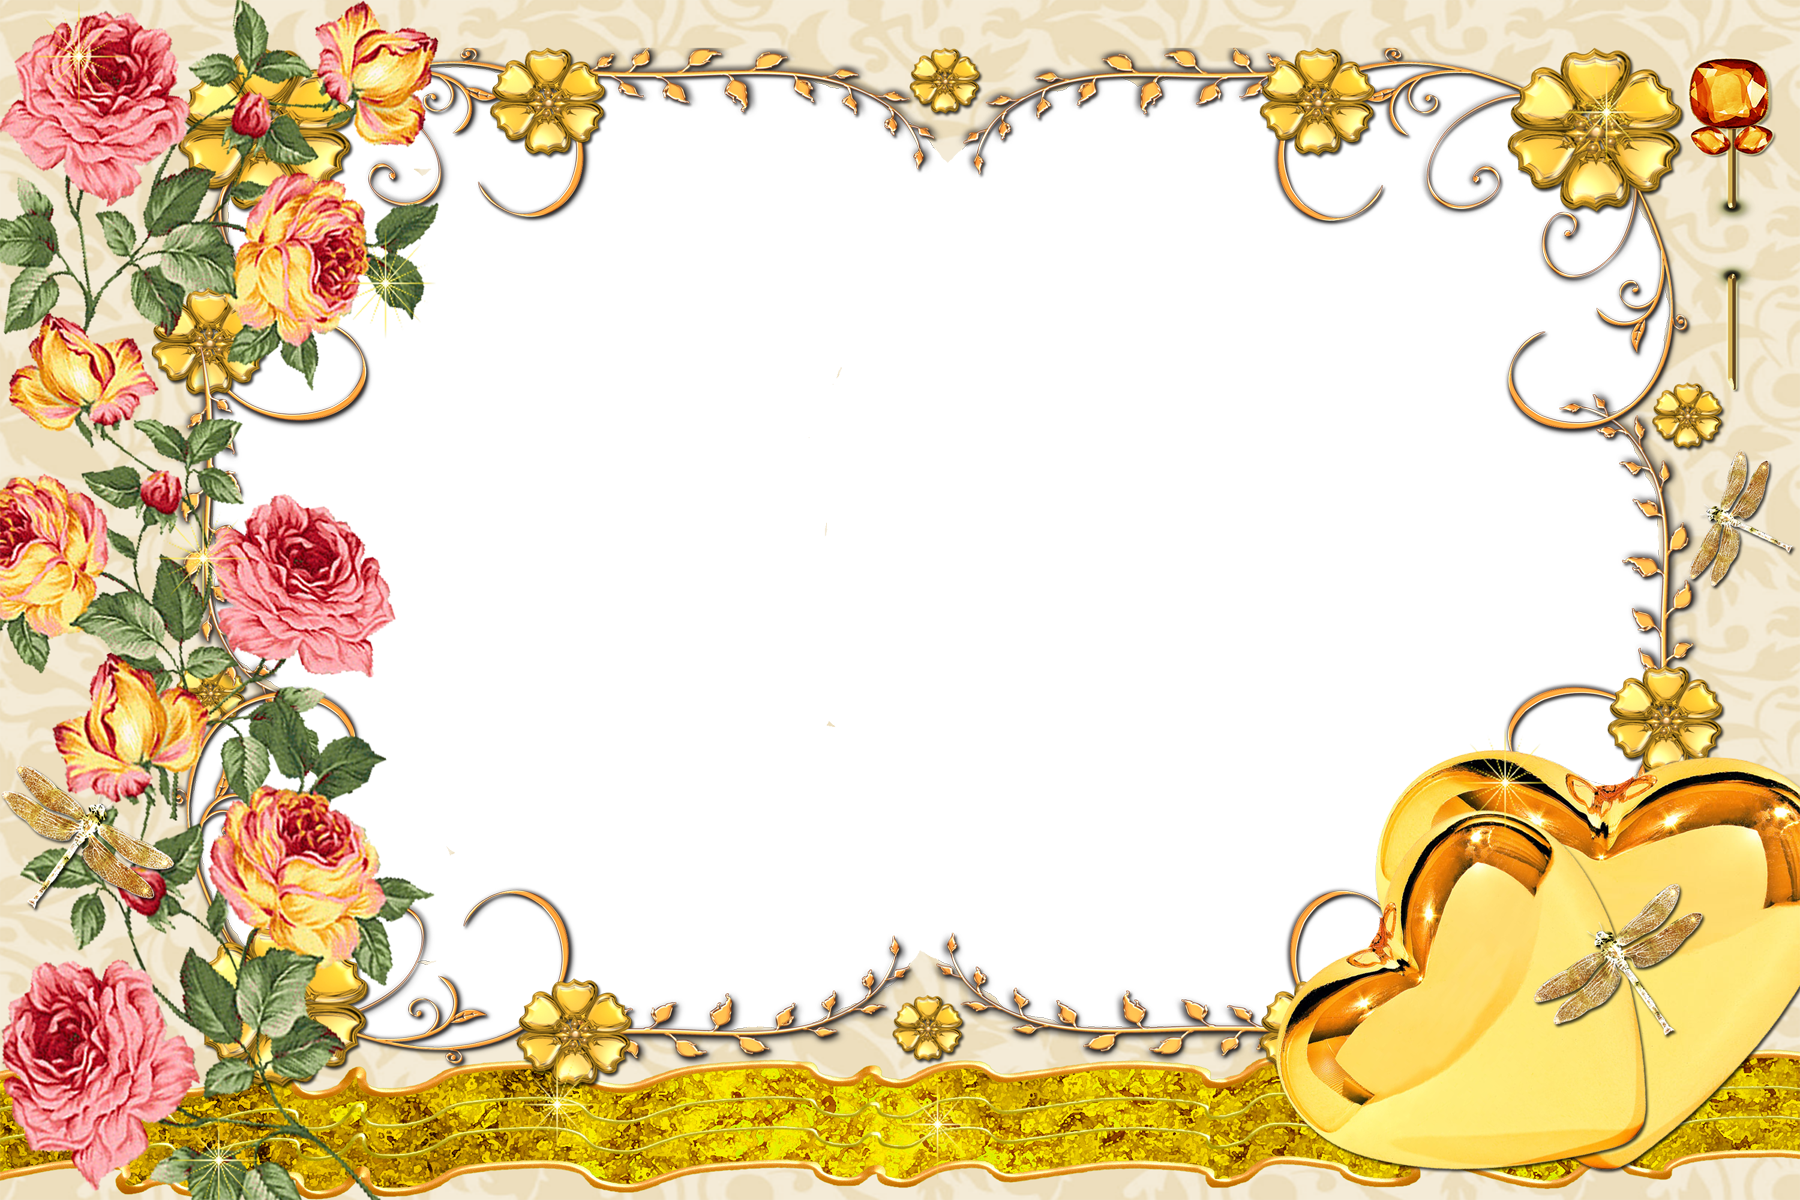 Large Transparent Gold Frame With Flowers Yopriceville - Select Image R=h:www.funnyphotoframes.com (1800x1200)